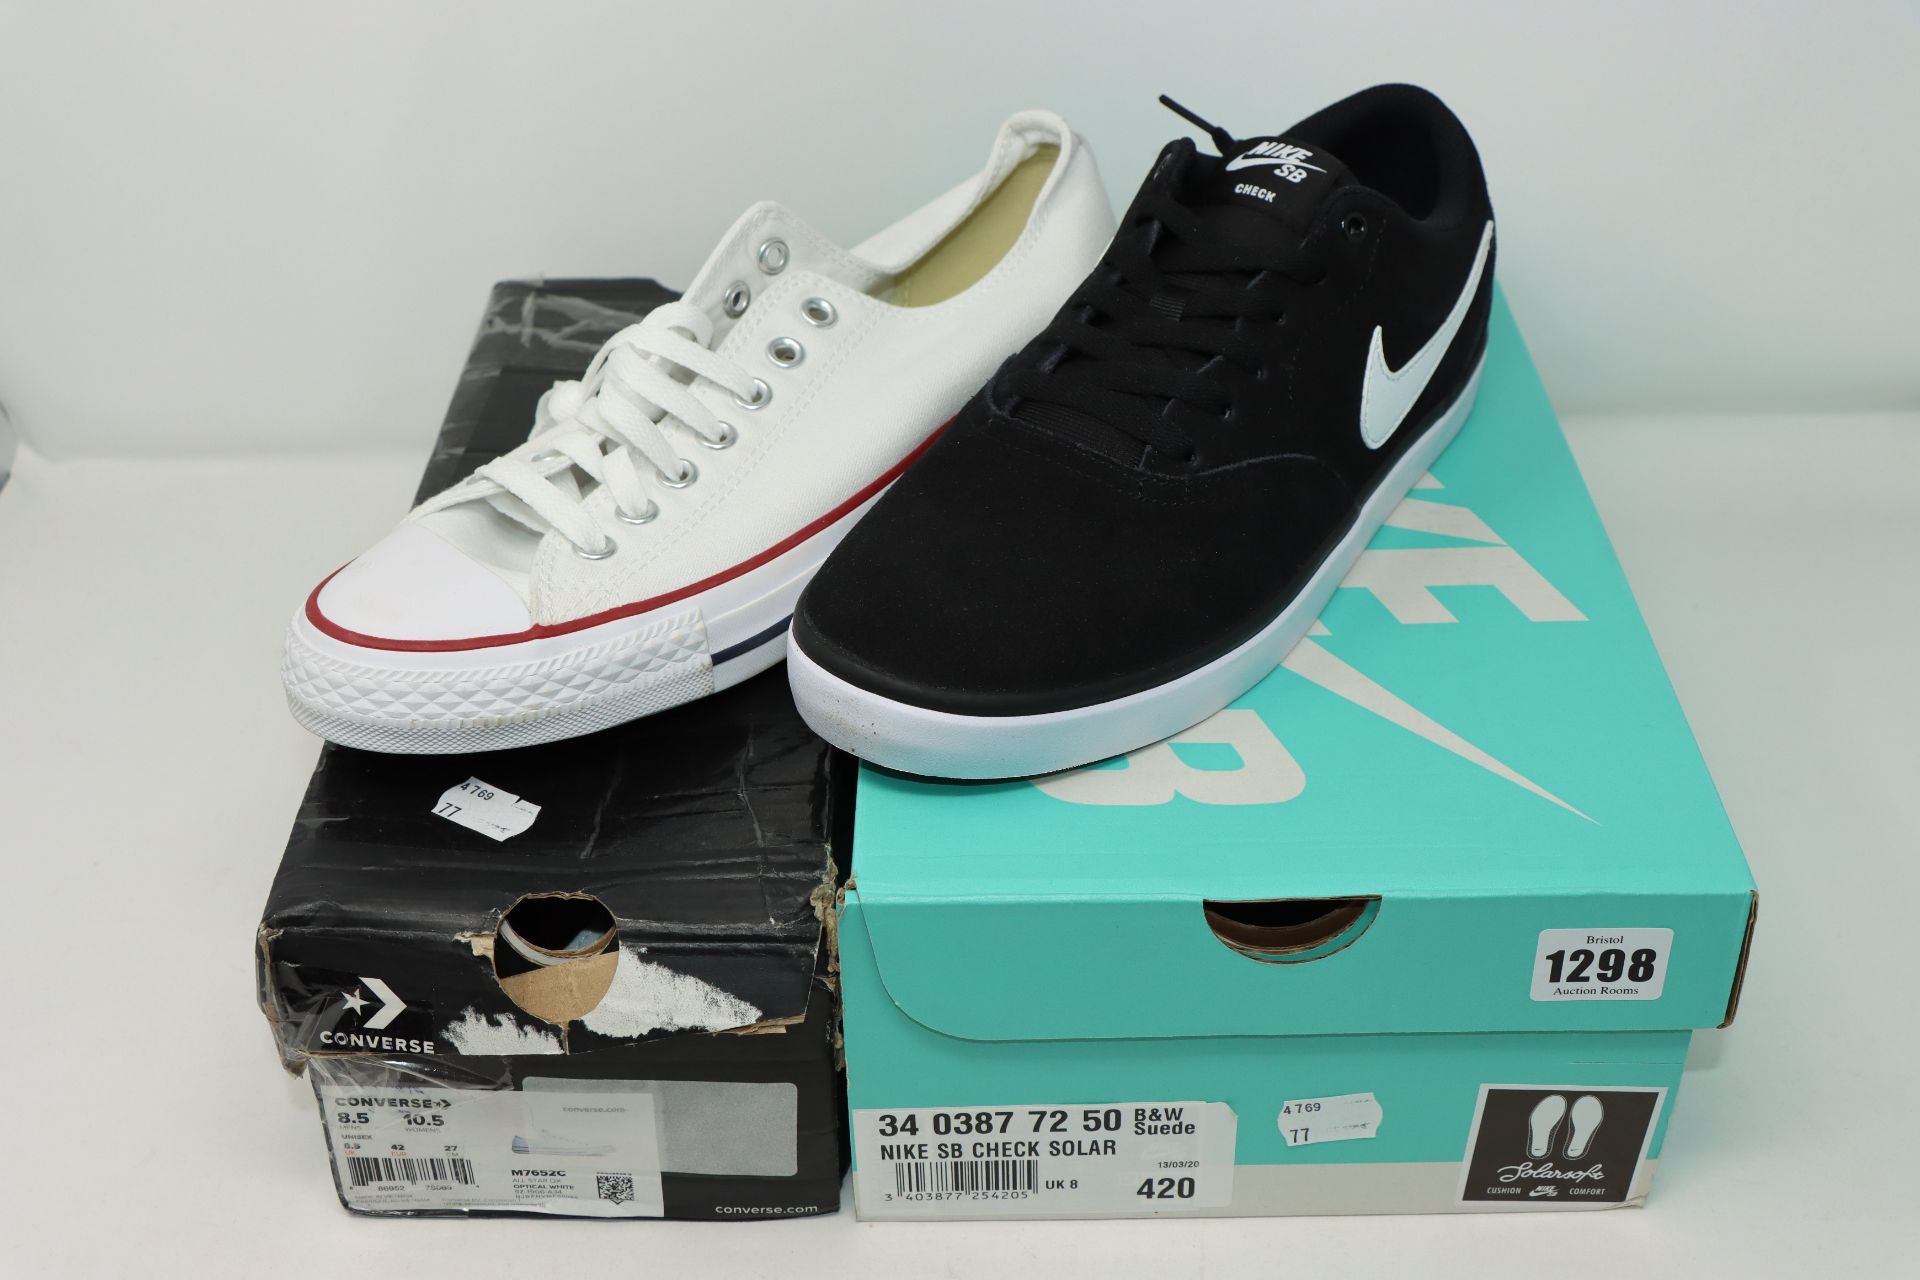 One as new Nike SB Black & White Check Solar Trainers size UK 8 (3403877250). One as new Converse